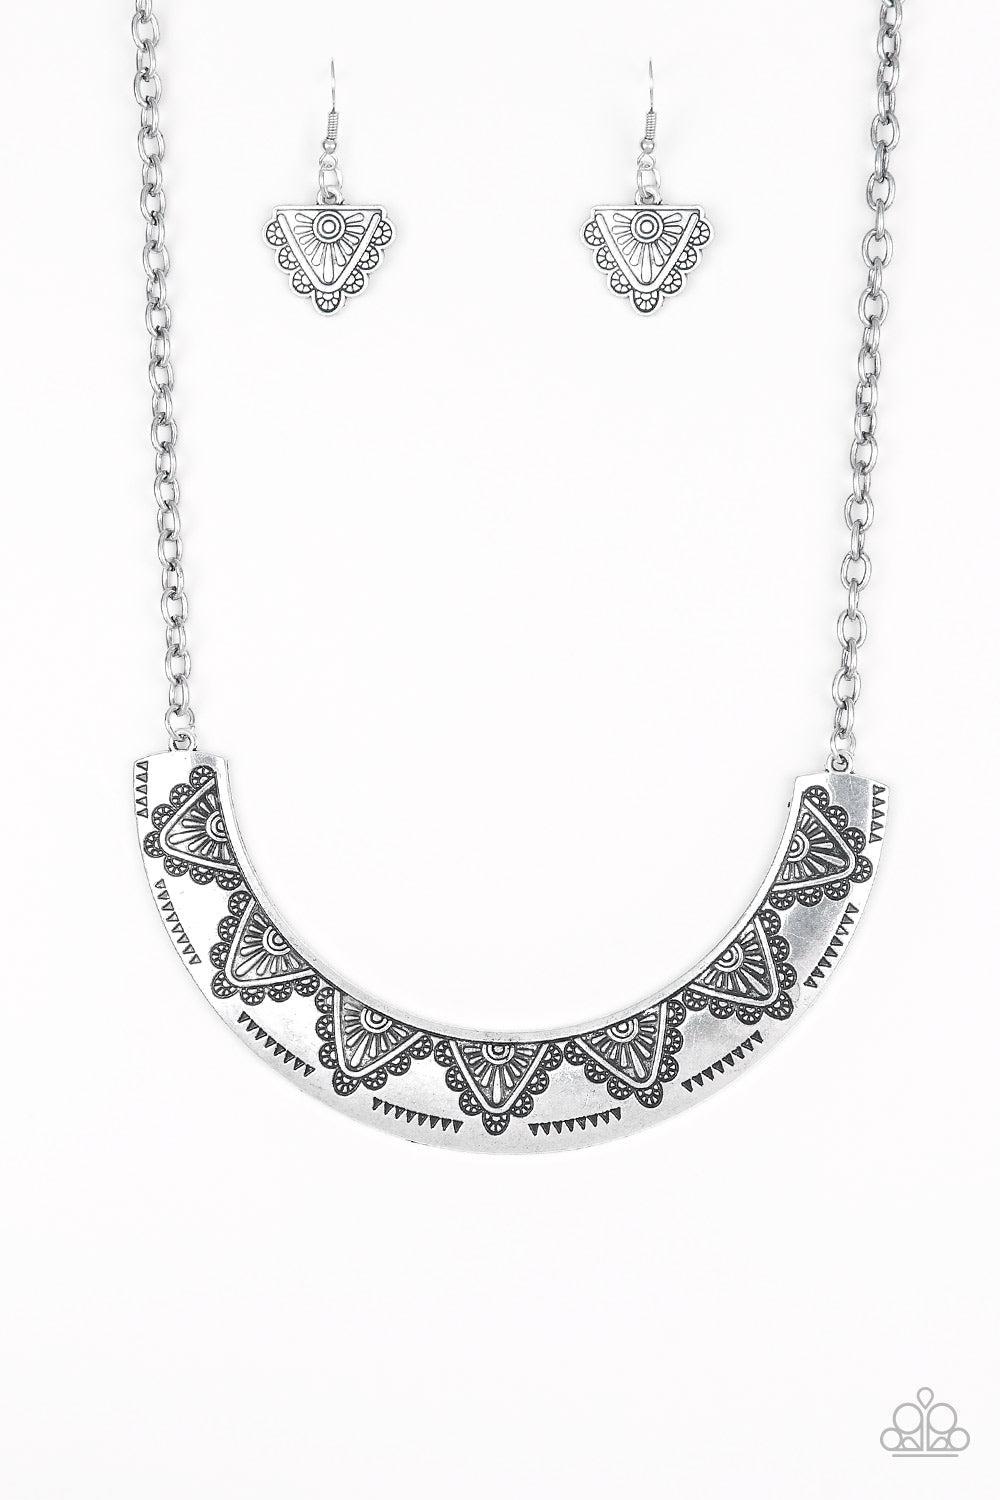 Persian Pharaoh Silver Necklace - Paparazzi Accessories- lightbox - CarasShop.com - $5 Jewelry by Cara Jewels